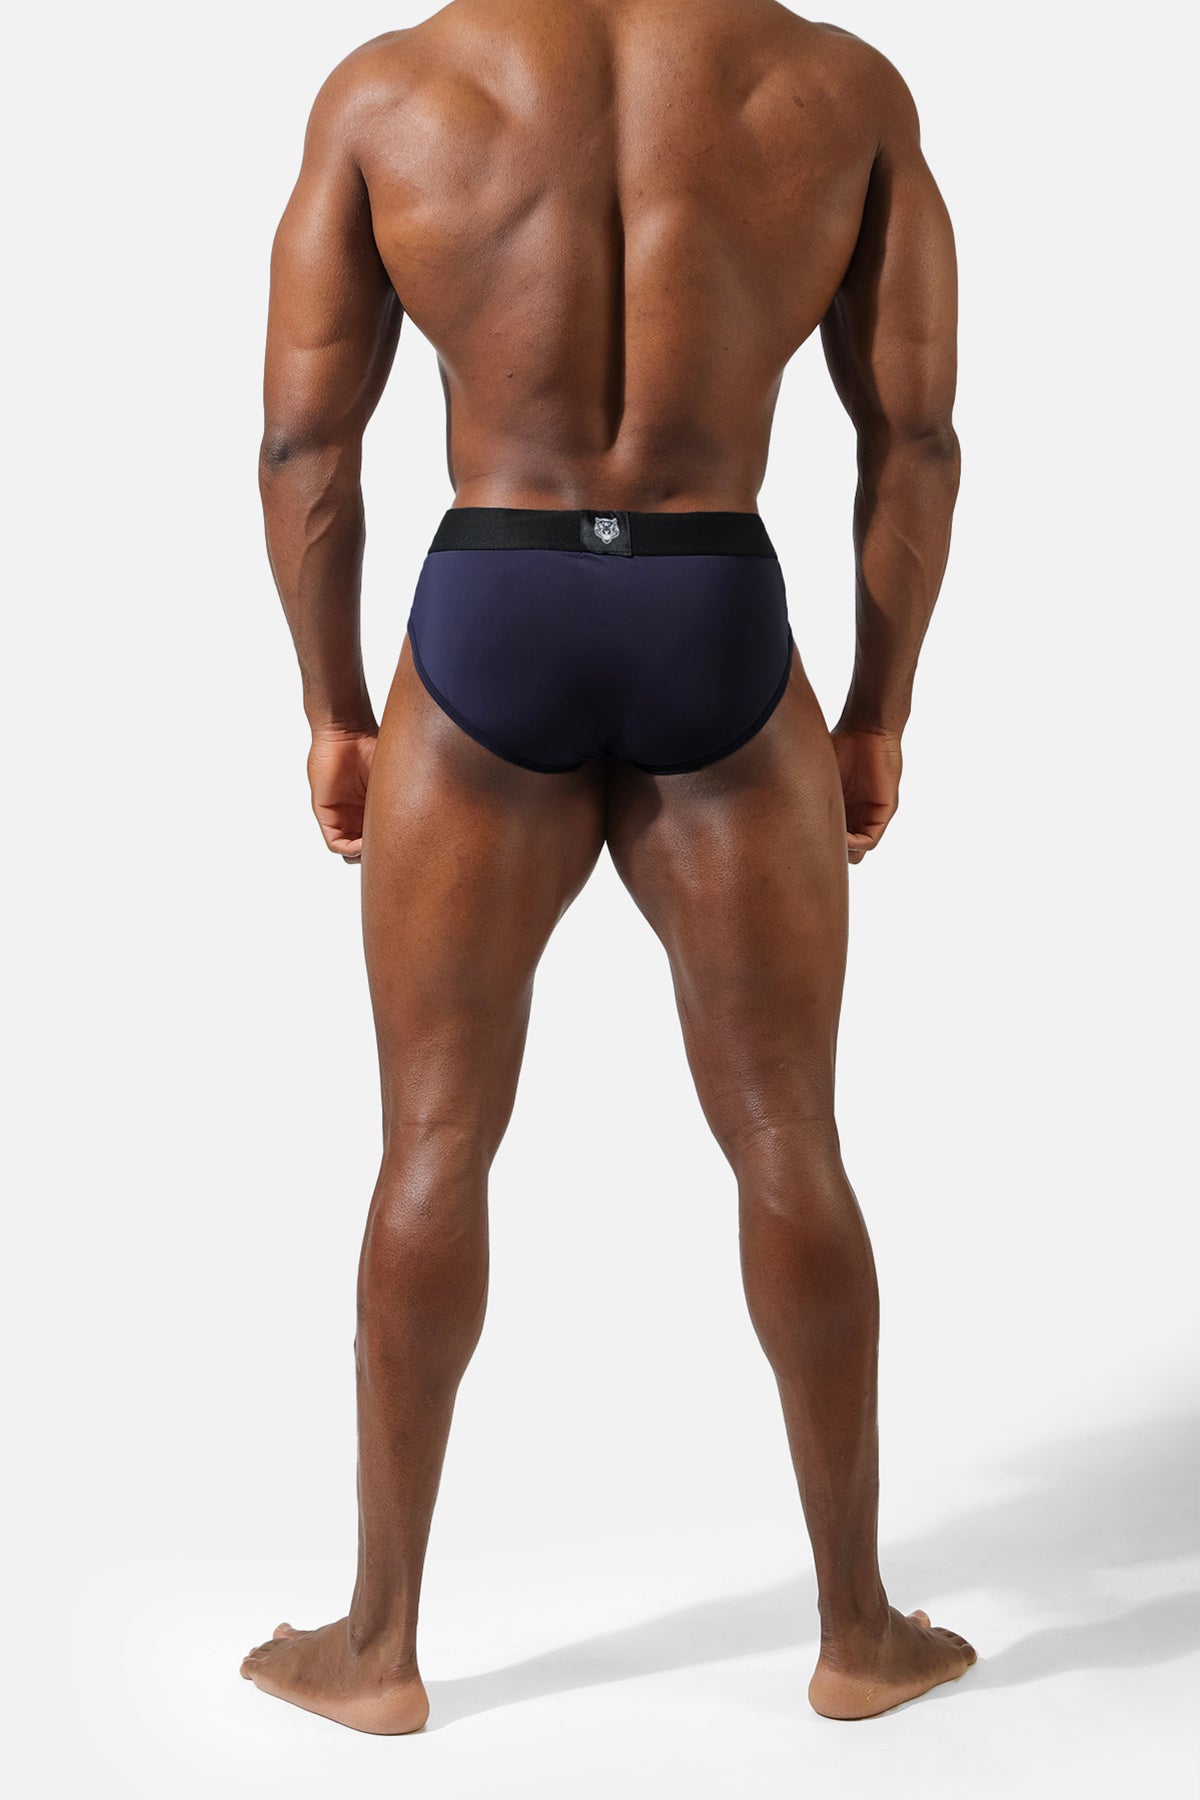 Men's Sexy Underwear - Loin Cloth with Pocket – Oh My!